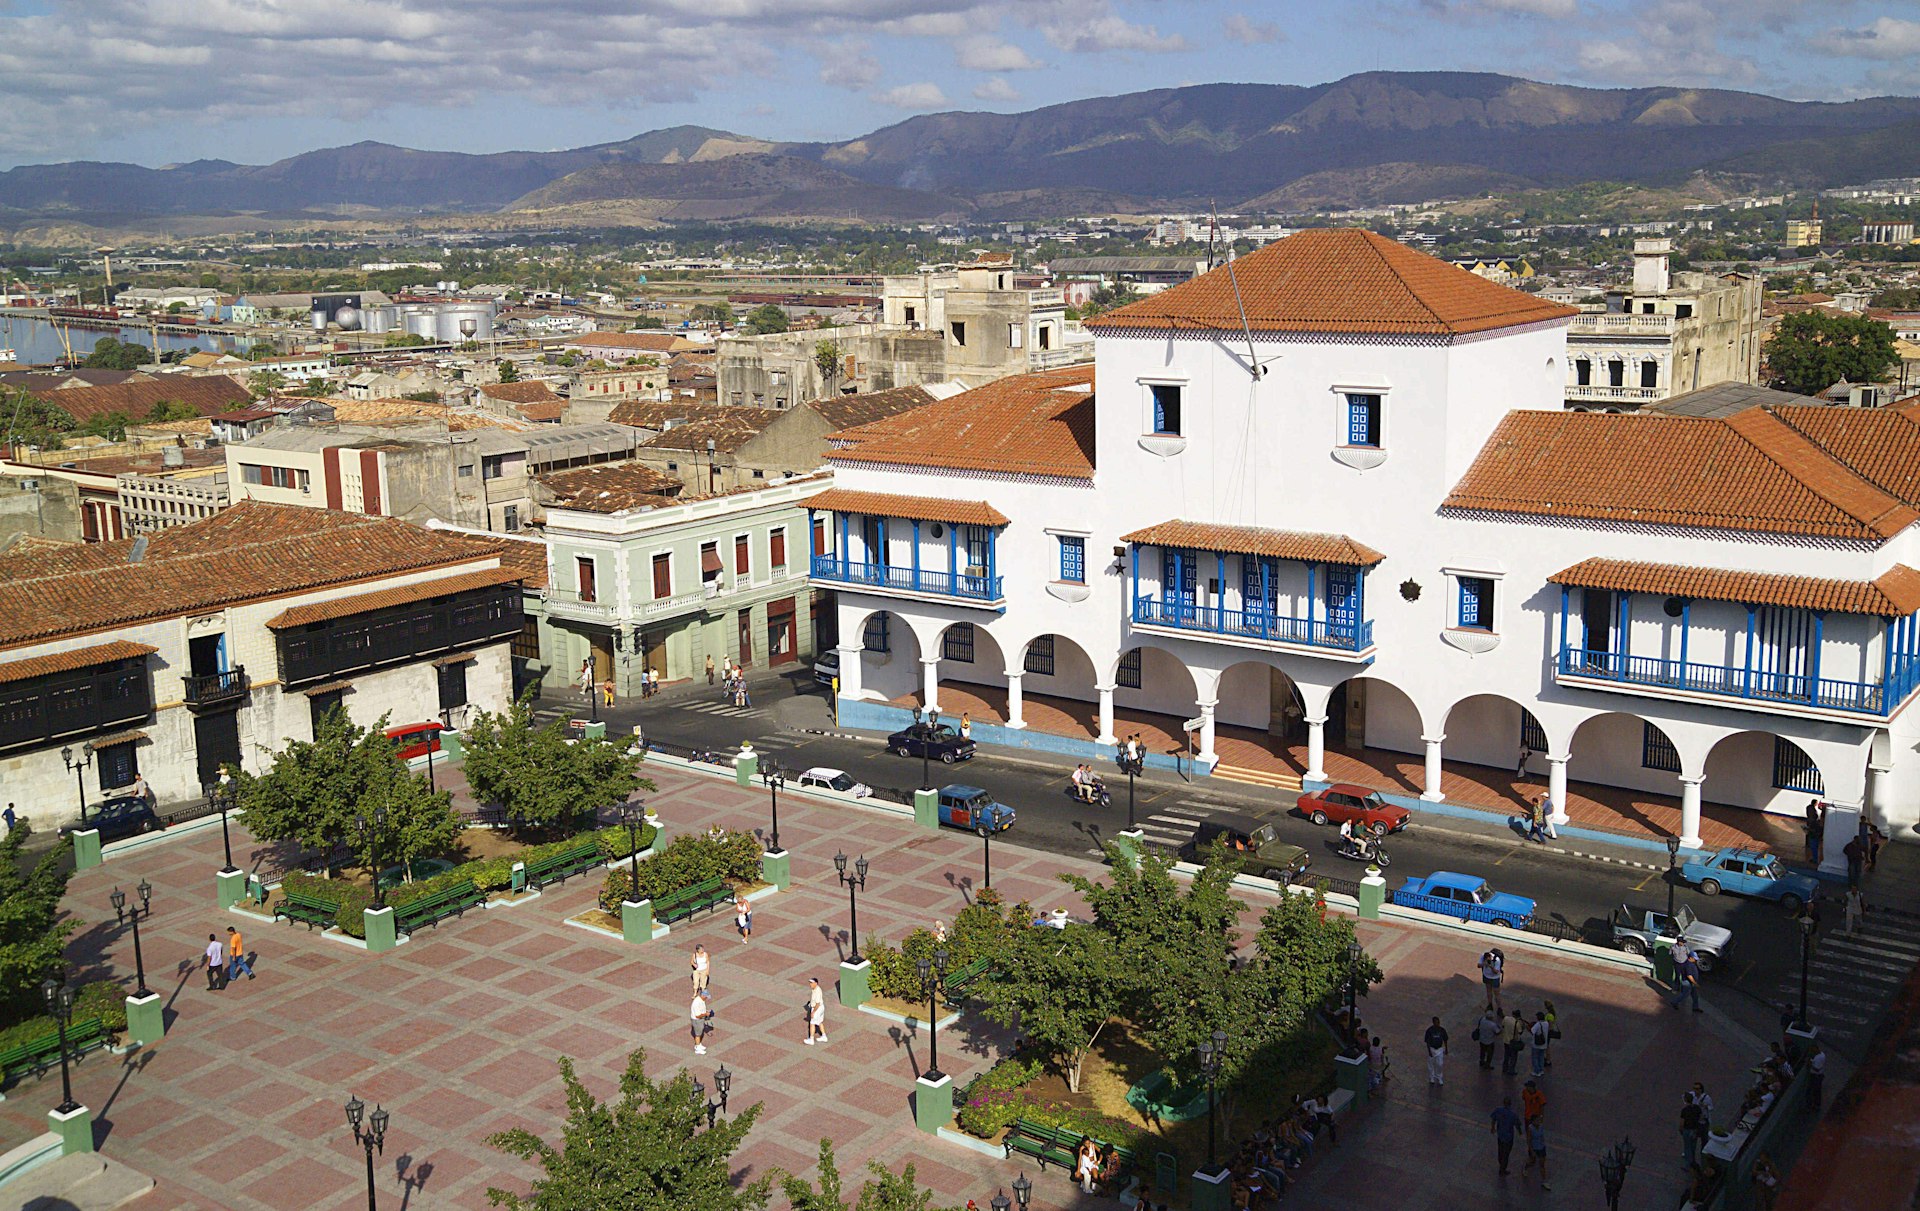 Cespedes Park and Town Hall in Santiago de Cuba. Image by Paul Thompson / Photolibrary / Getty